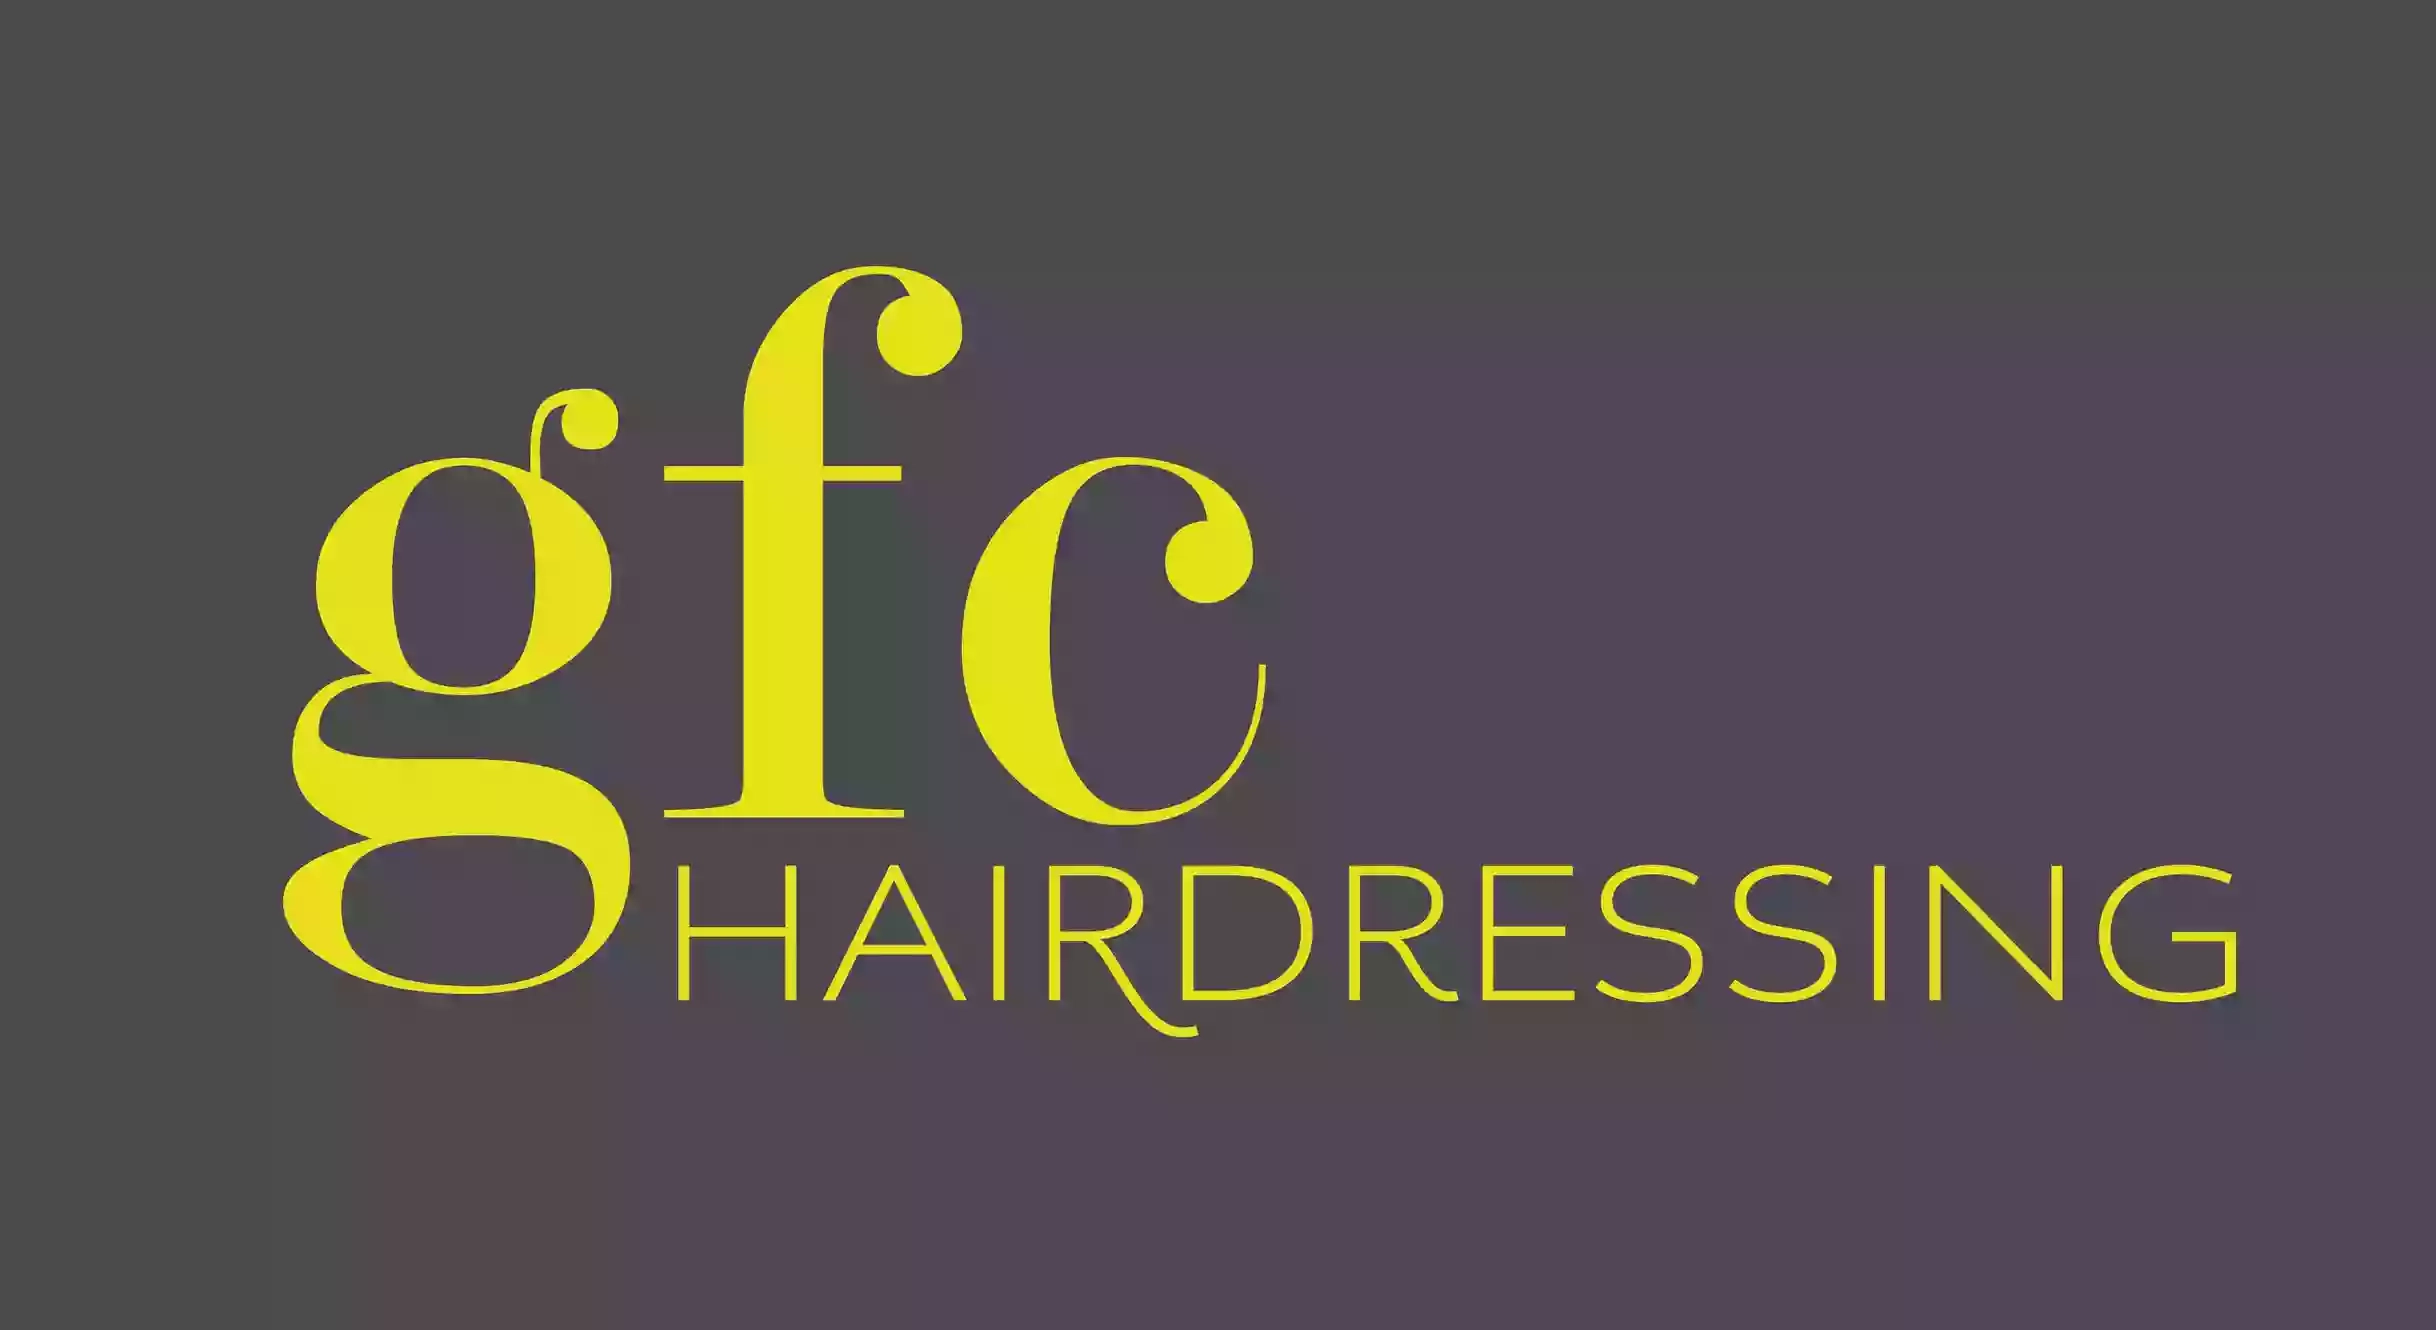 gfc hairdressing